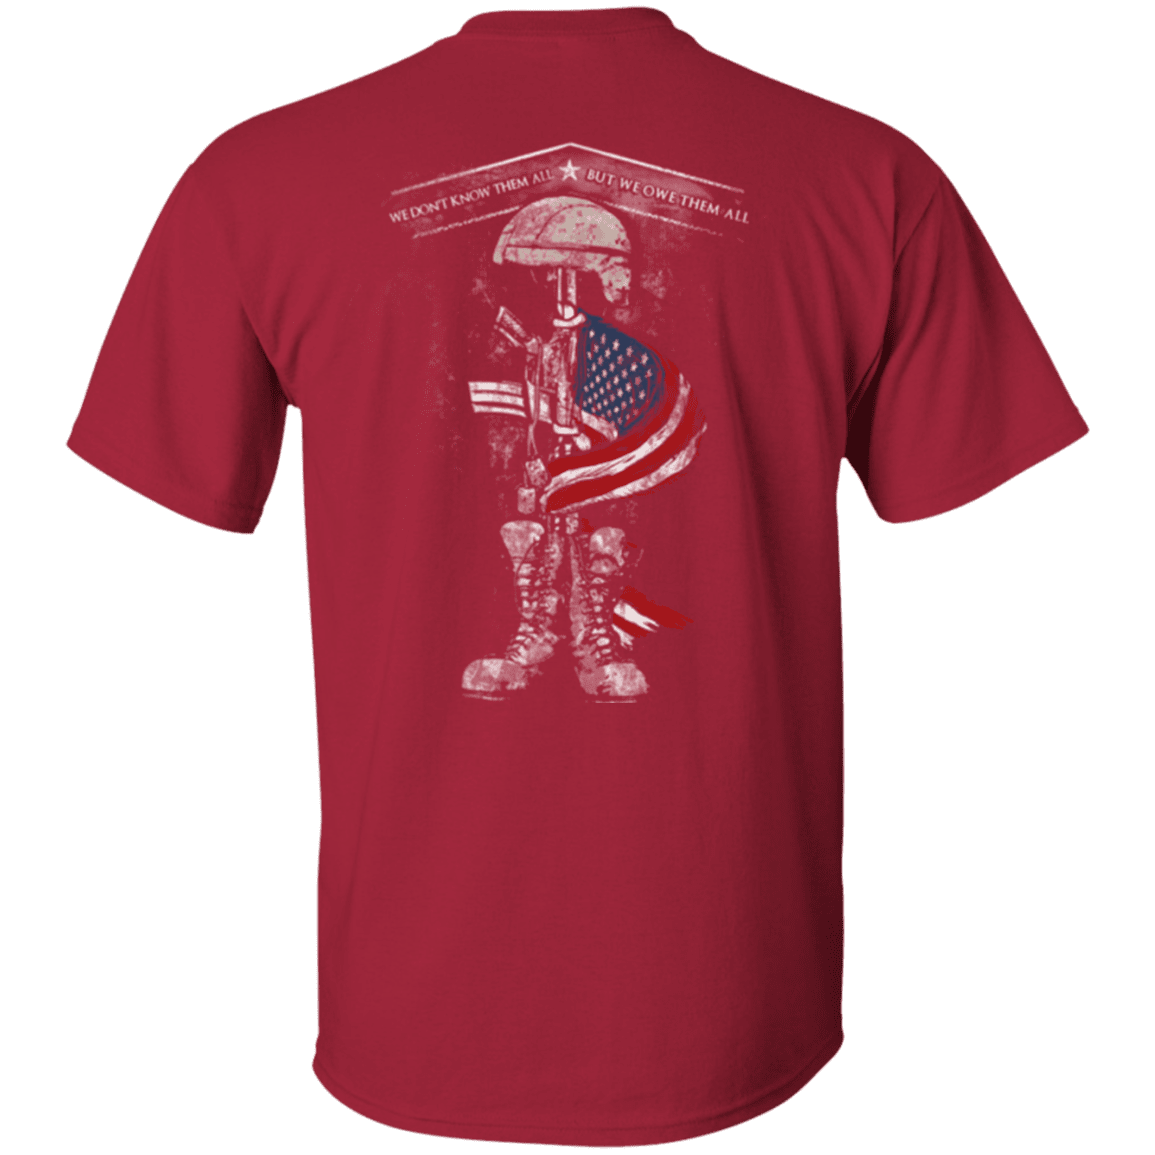 Military T-Shirt "Veteran - We Don't Know Them All But We Owe Them All"-TShirt-General-Veterans Nation